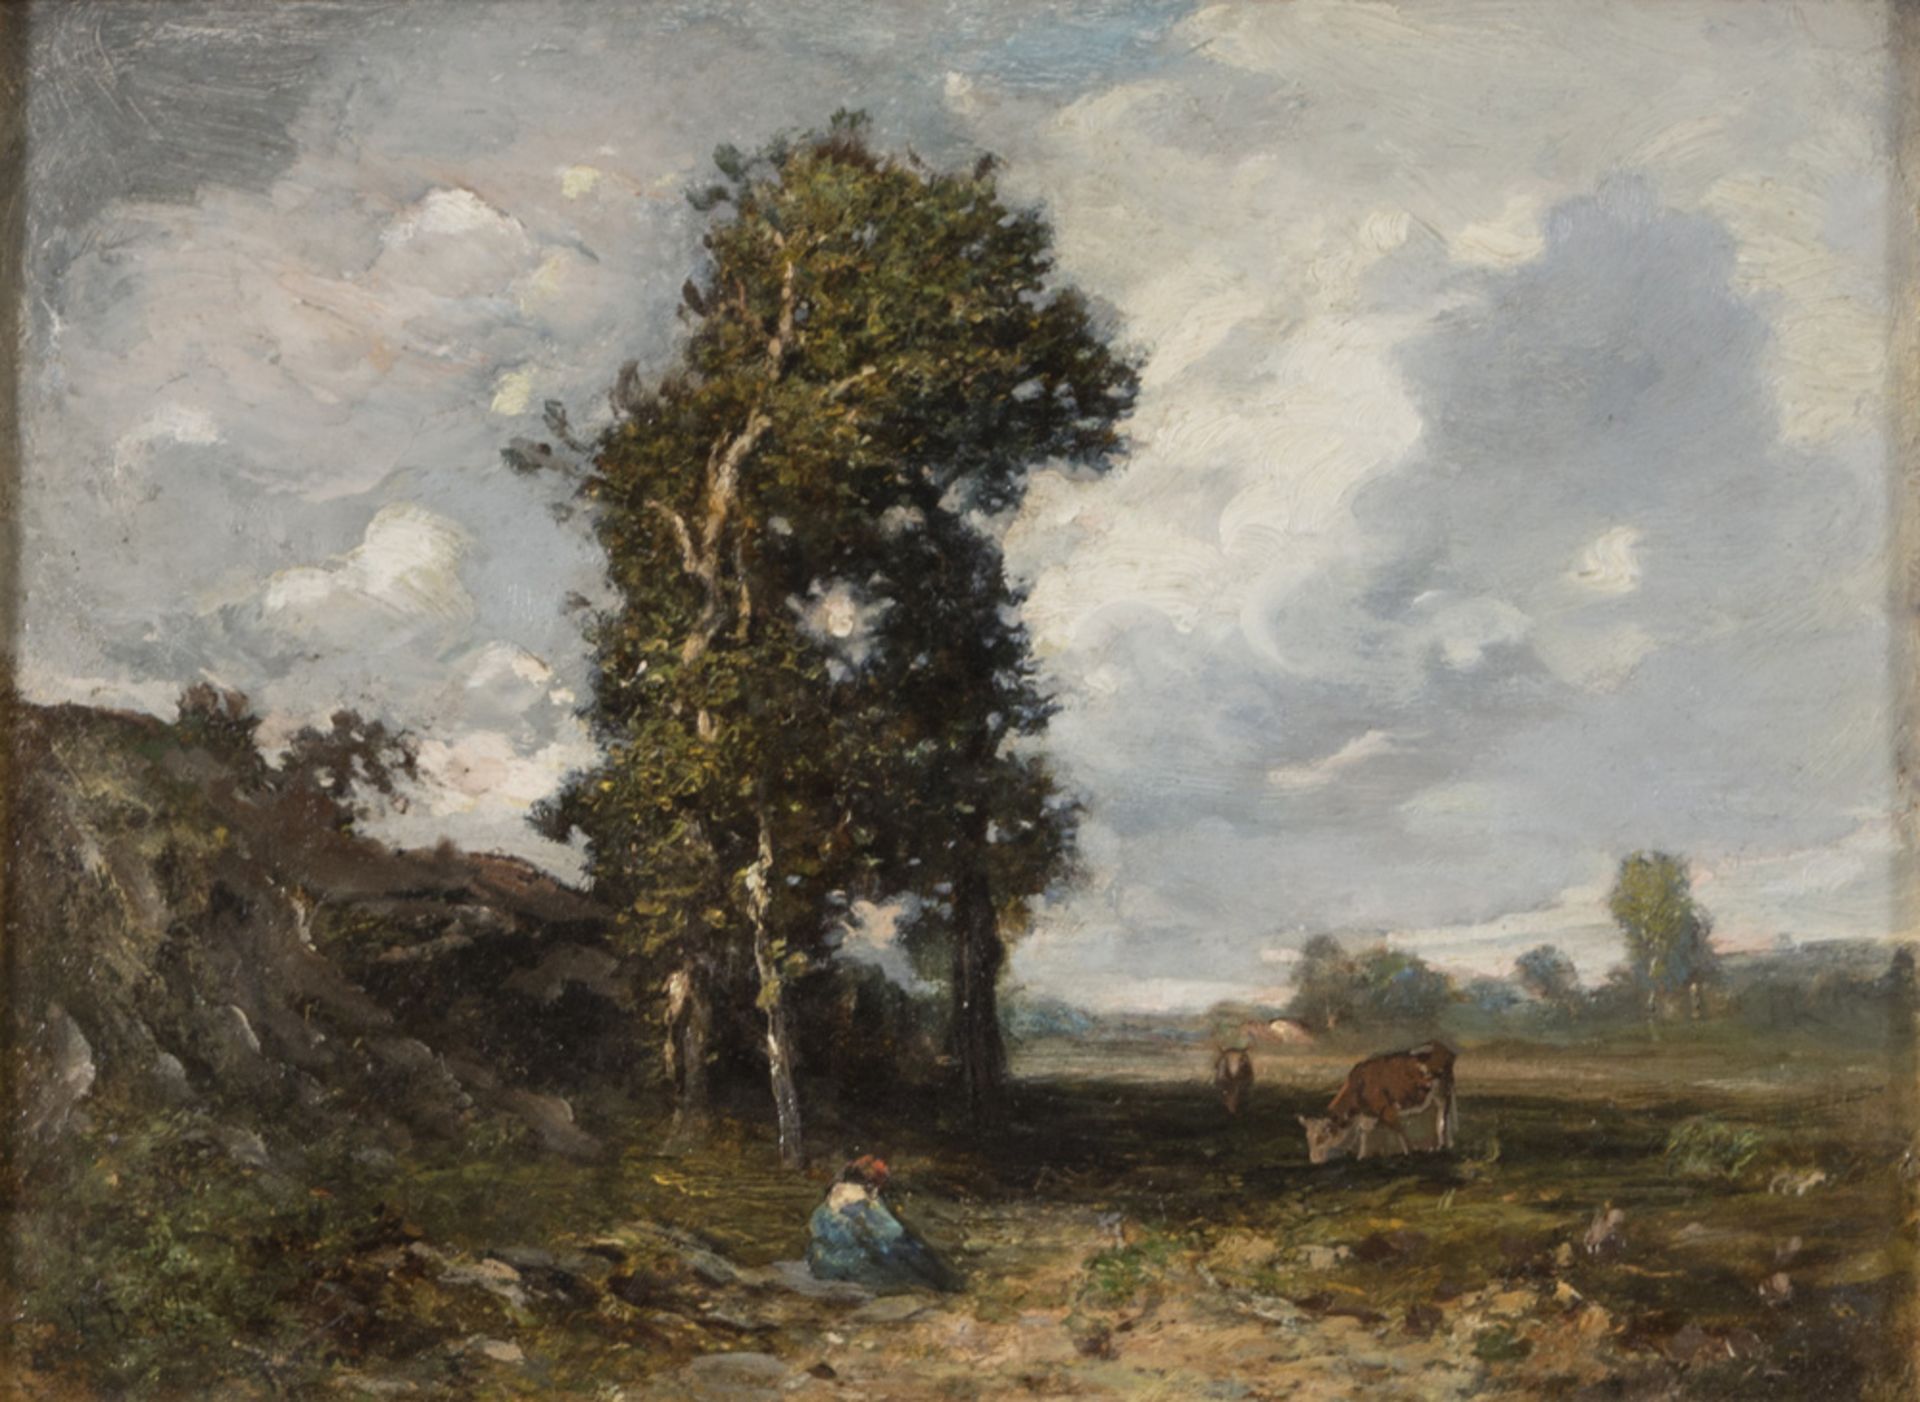 VITTORIO BUSSOLINO (Turin 1853 - 1922) LANDSCAPE WITH FARMER AND HERDS Oil on panel, cm. 36 x 44